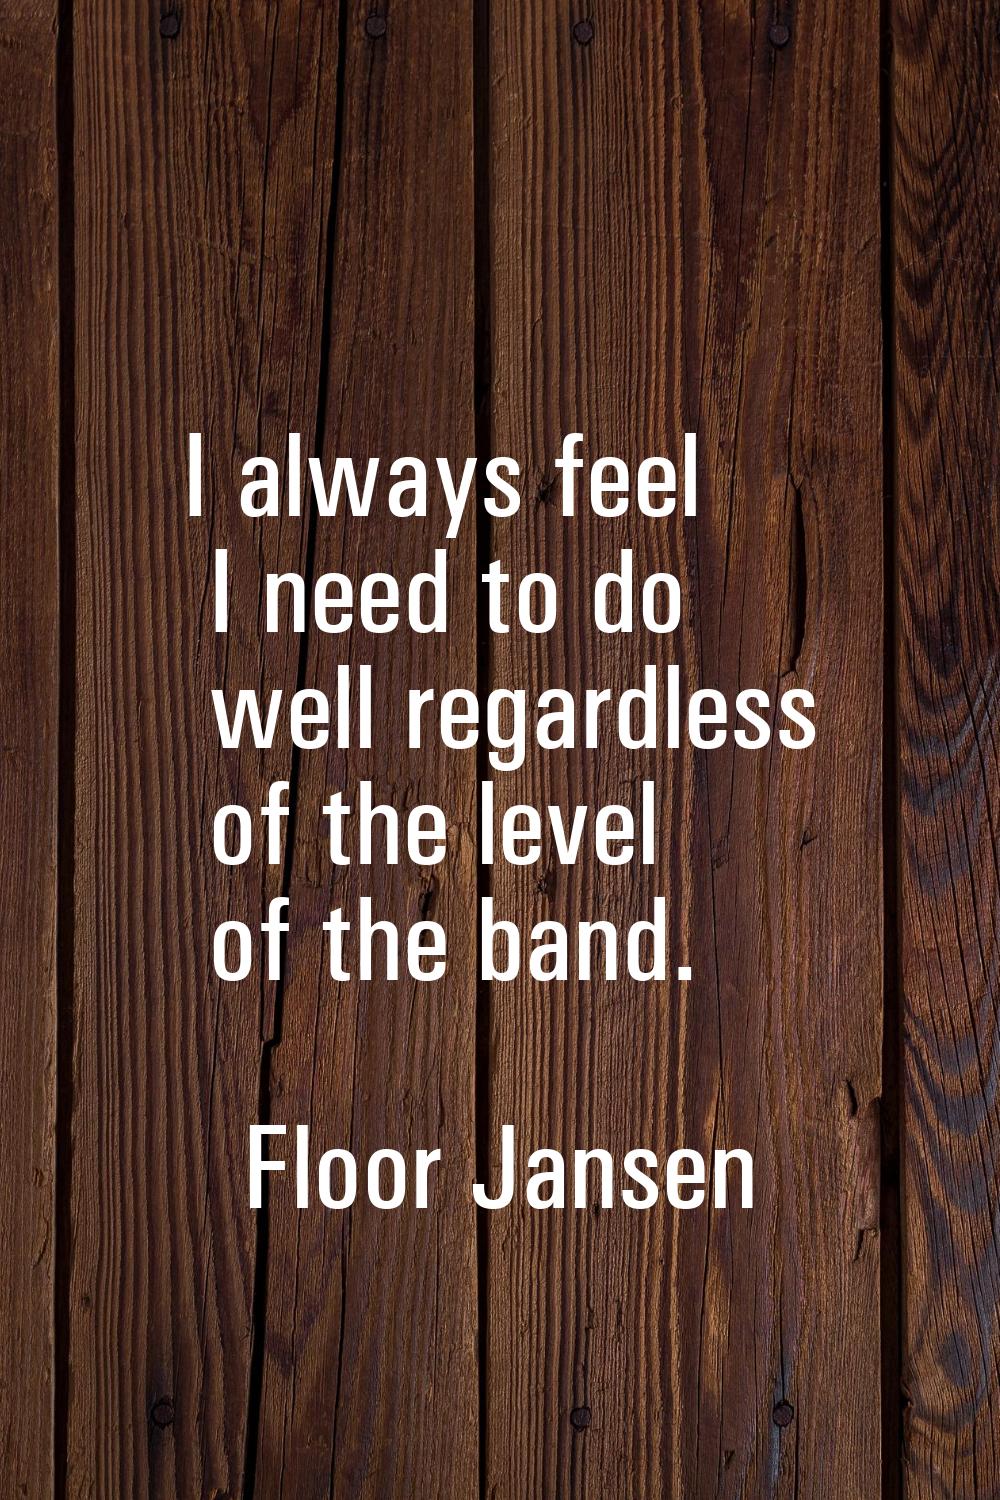 I always feel I need to do well regardless of the level of the band.